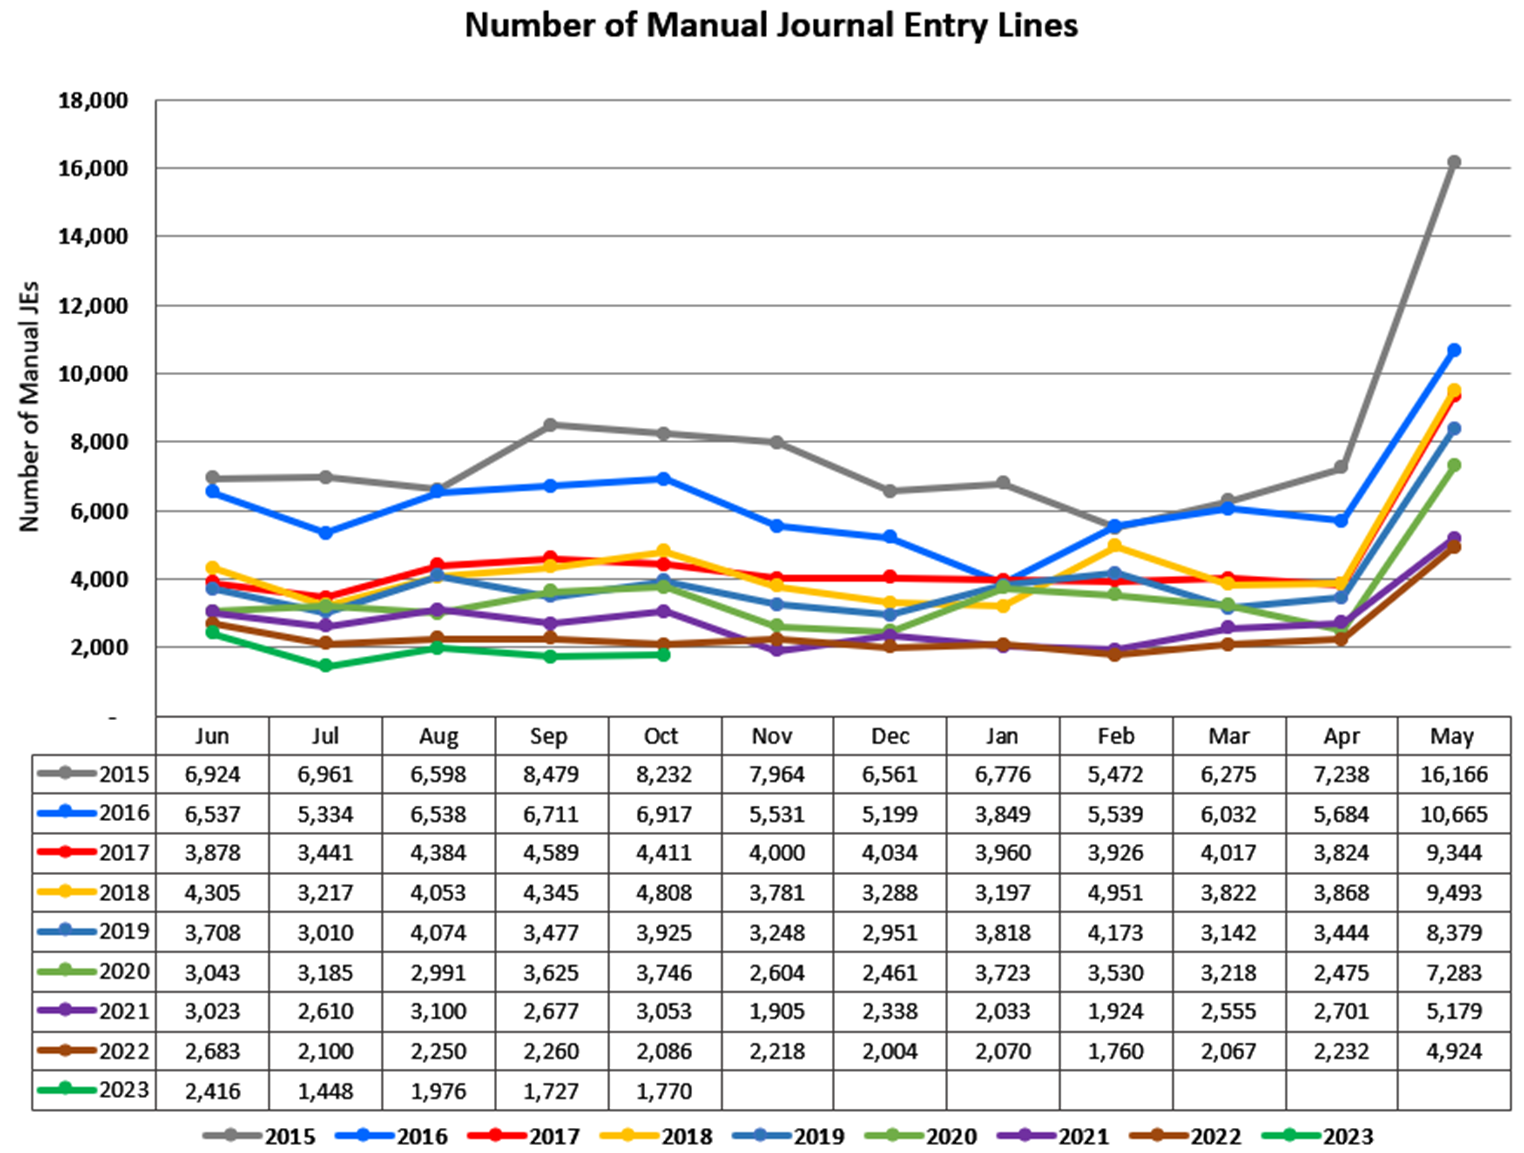 Number of Manual Journal Entry Lines